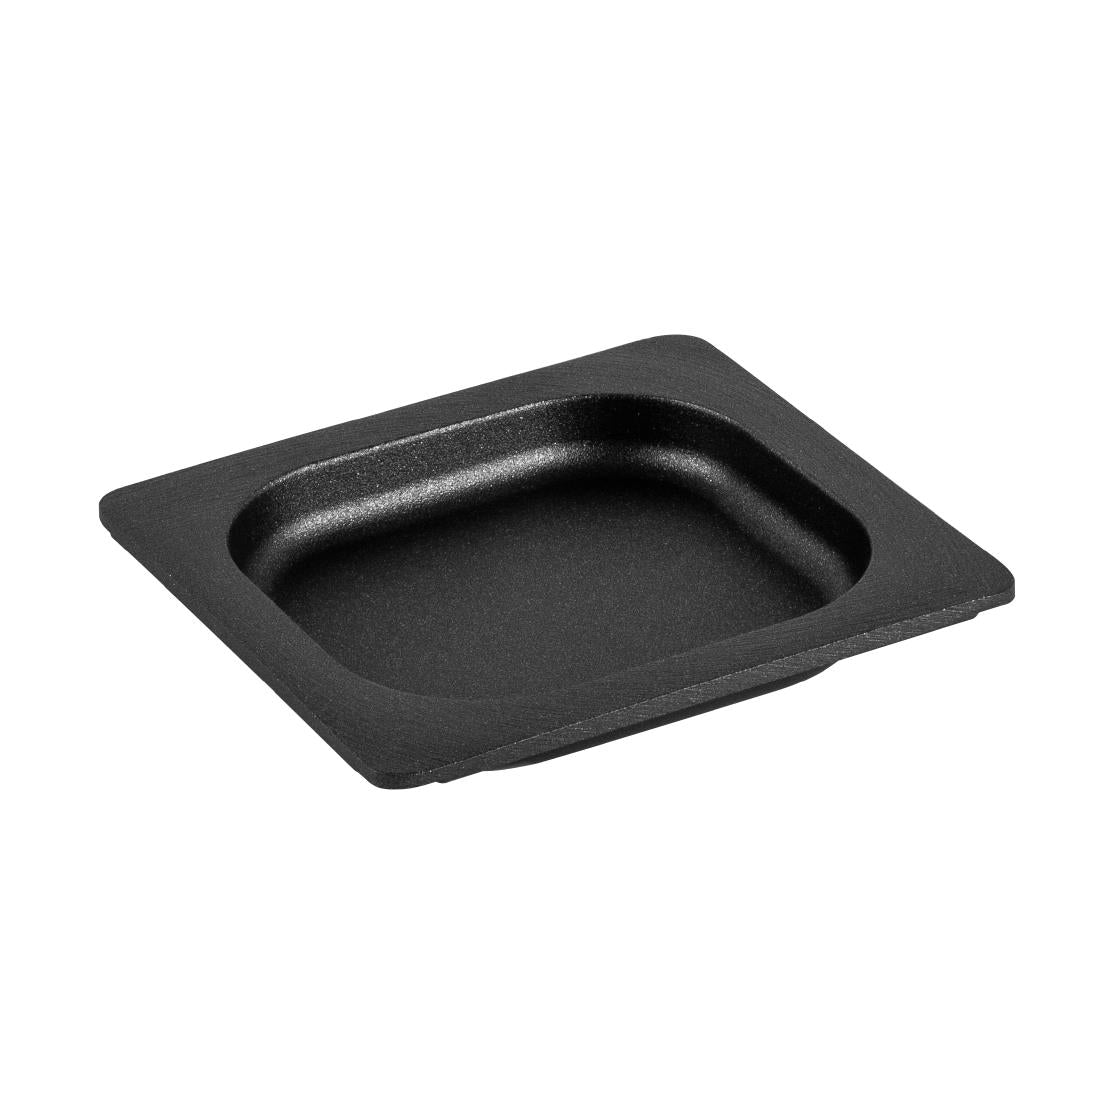 AT310 Josper Charcoal Oven 1/6 Gastronorm Tray 20mm